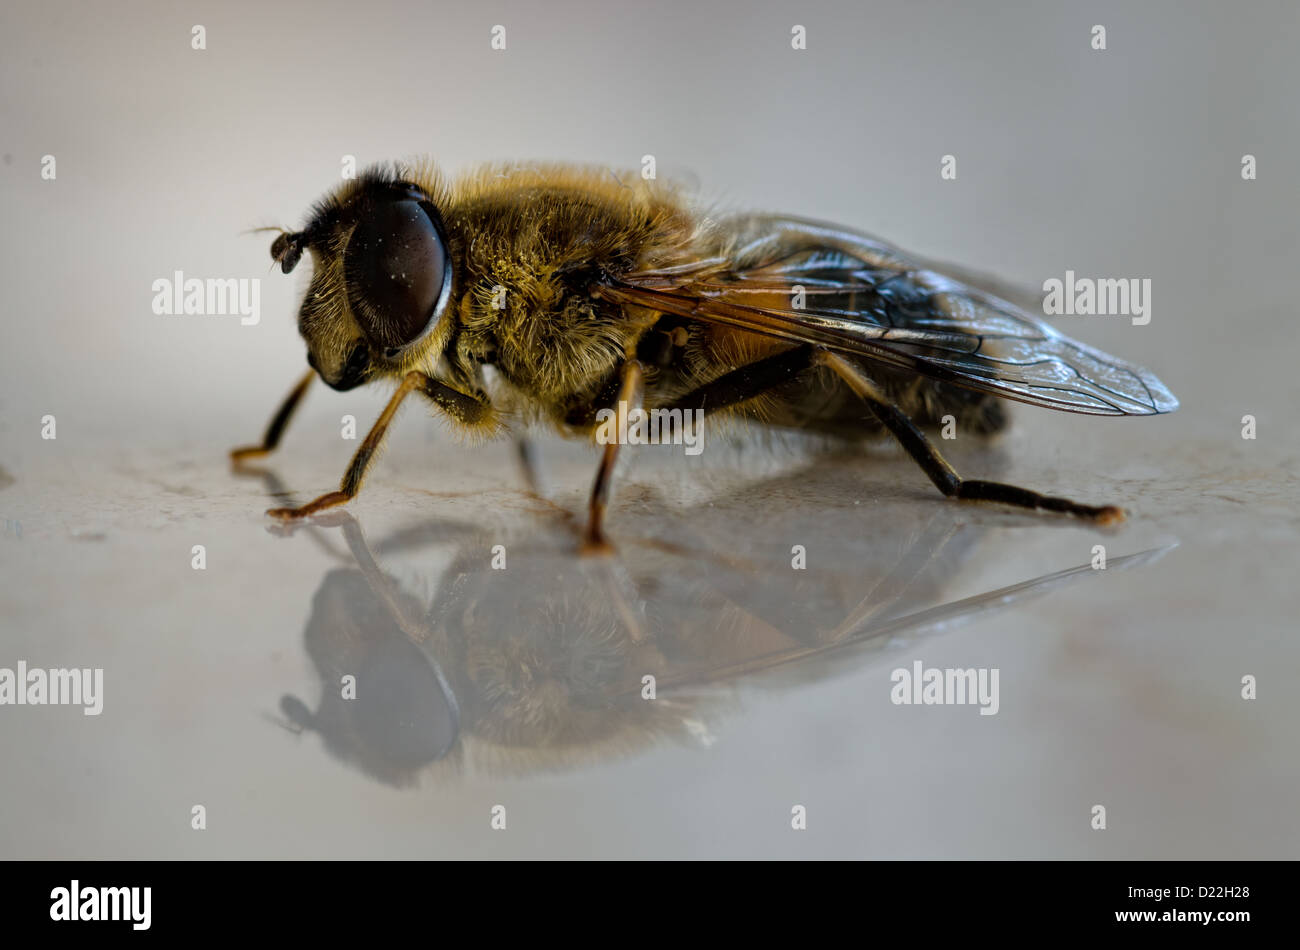 closeup of a wasp with reflection Stock Photo